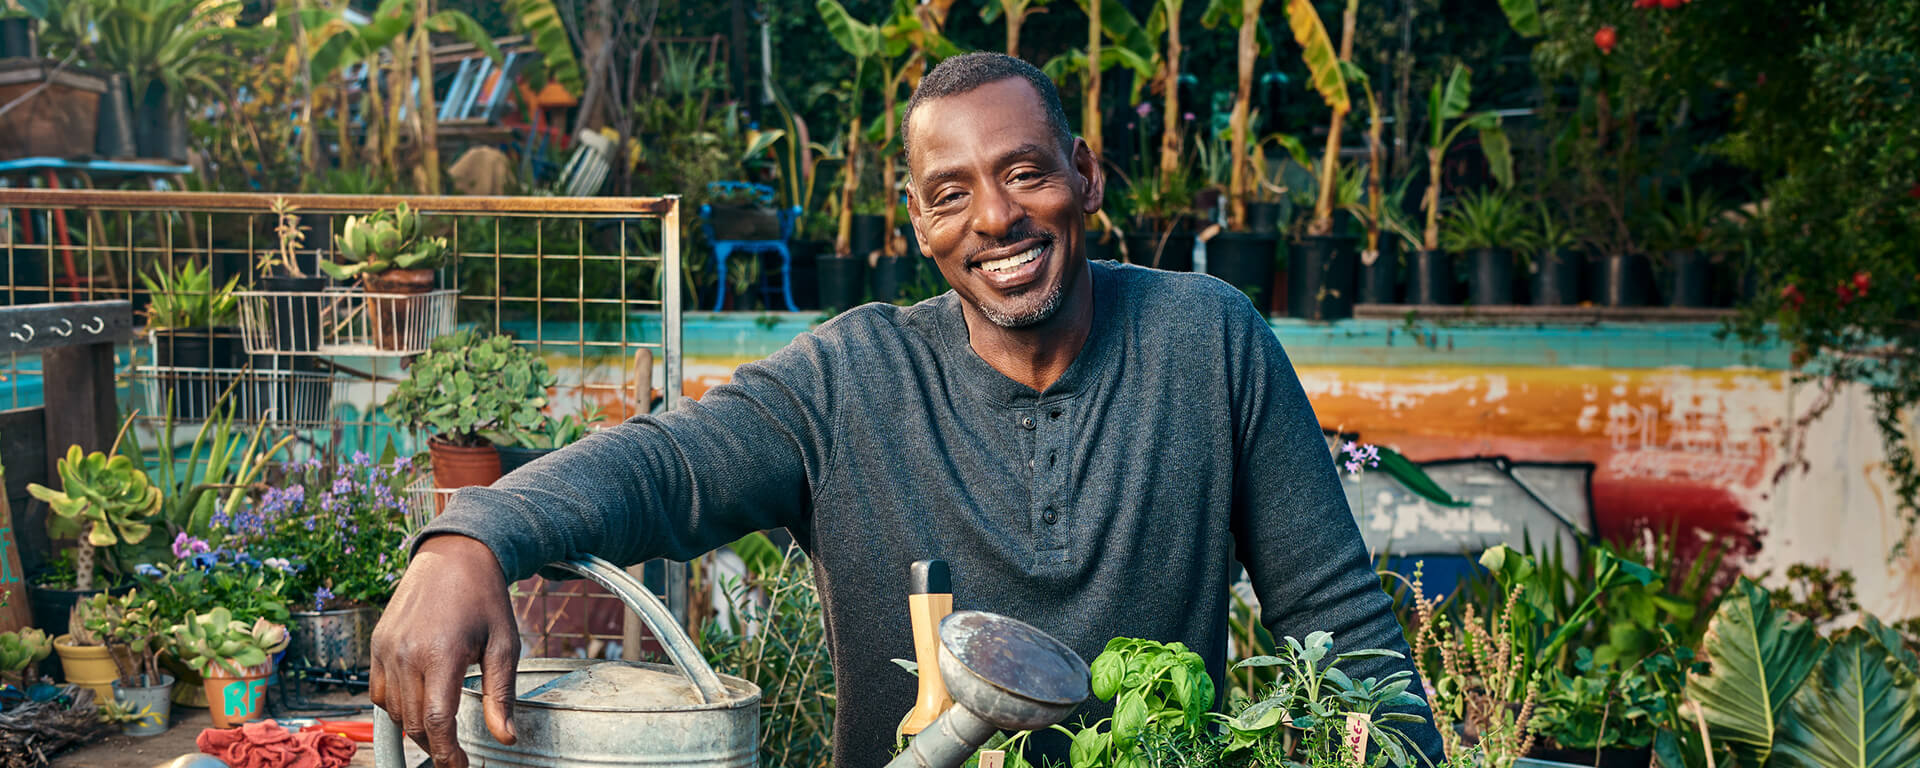 Ron Finley sits in his garden and talks with Capital One about his mission to fight food inequality and create better access to fresh produce in his community